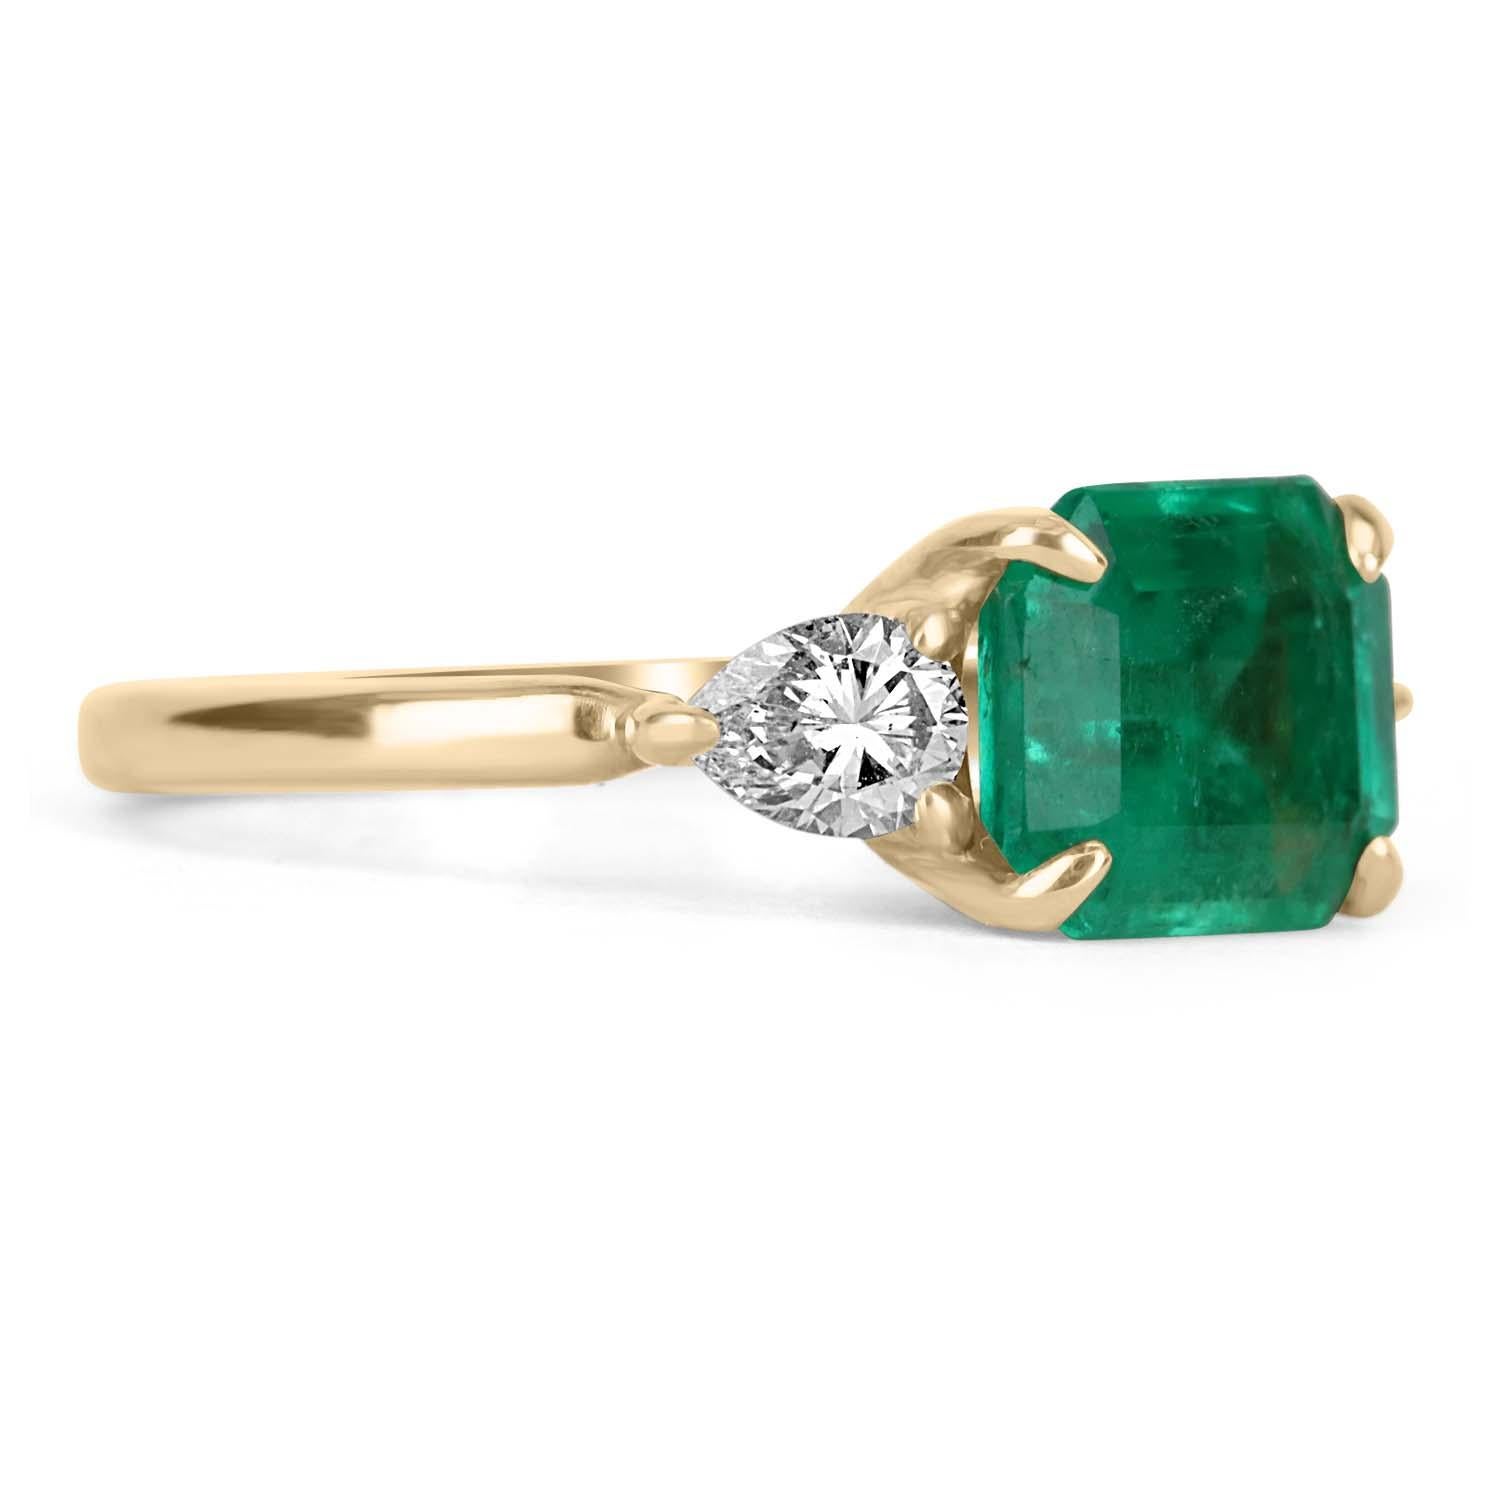 Featured is a Colombian emerald and diamond three-stone engagement or right-hand ring. An extraordinary custom-created ring made by JR Colombian Emeralds. Dexterously crafted in gleaming 18K gold, this ring displays a 2.17-carat natural Colombian